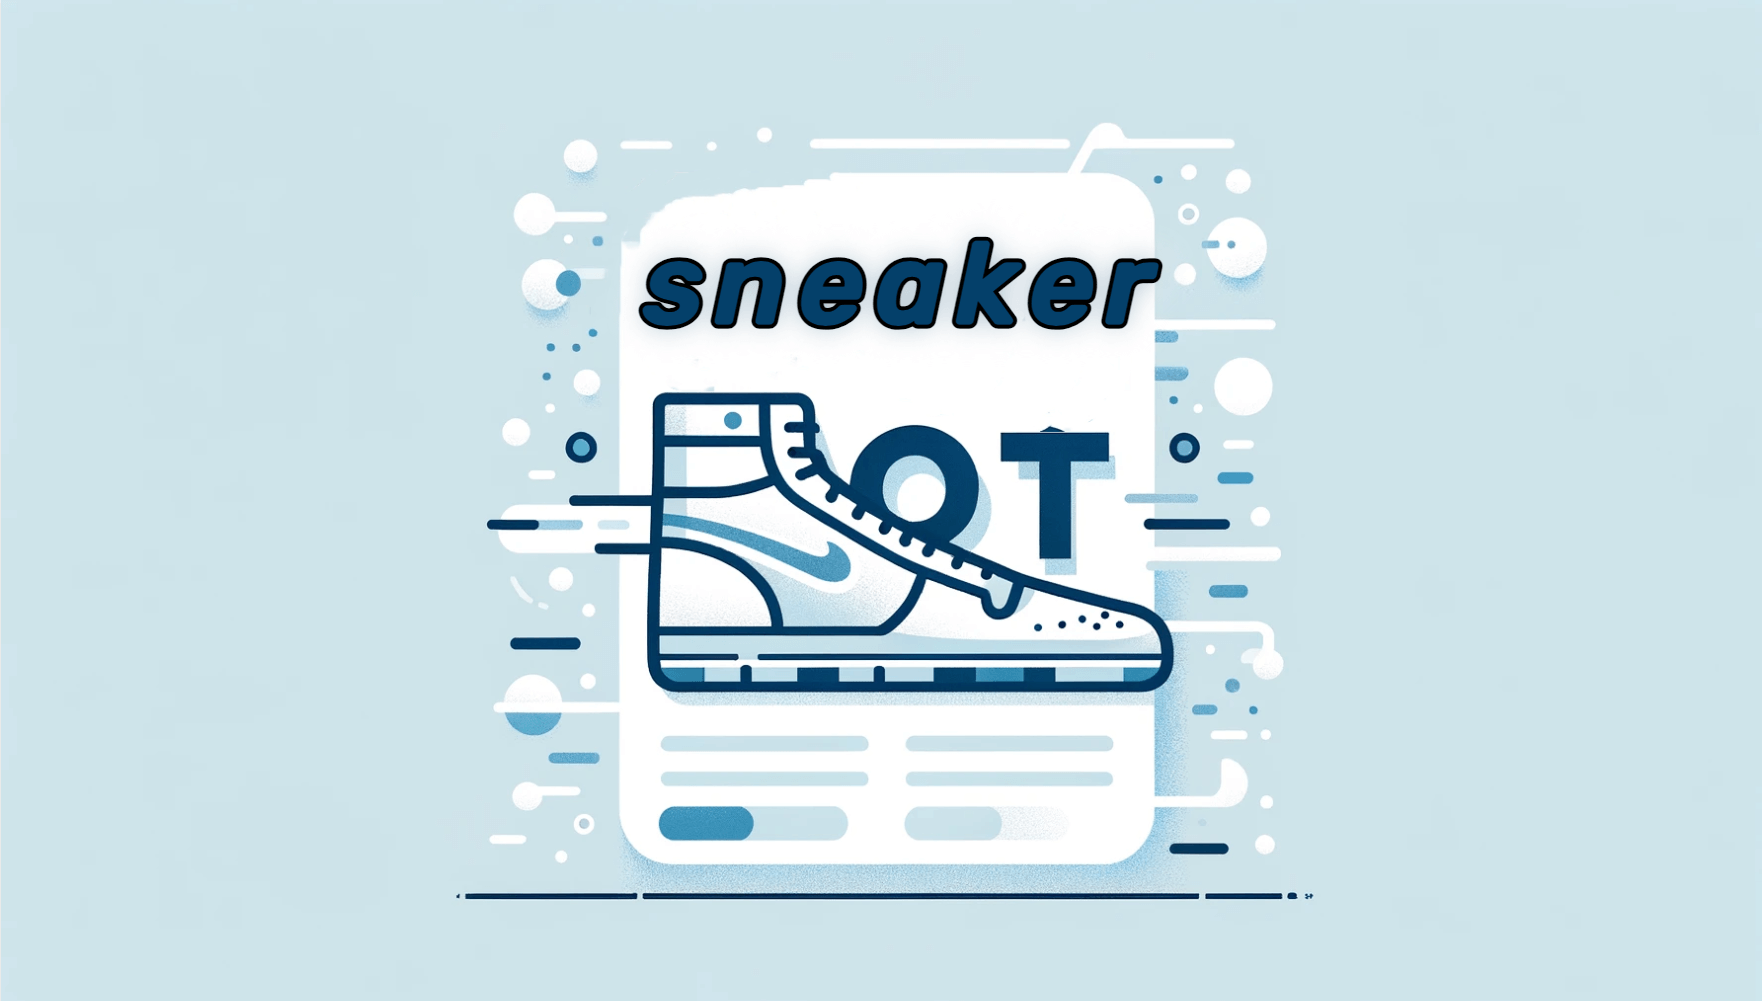 Are Sneaker Bots Illegal